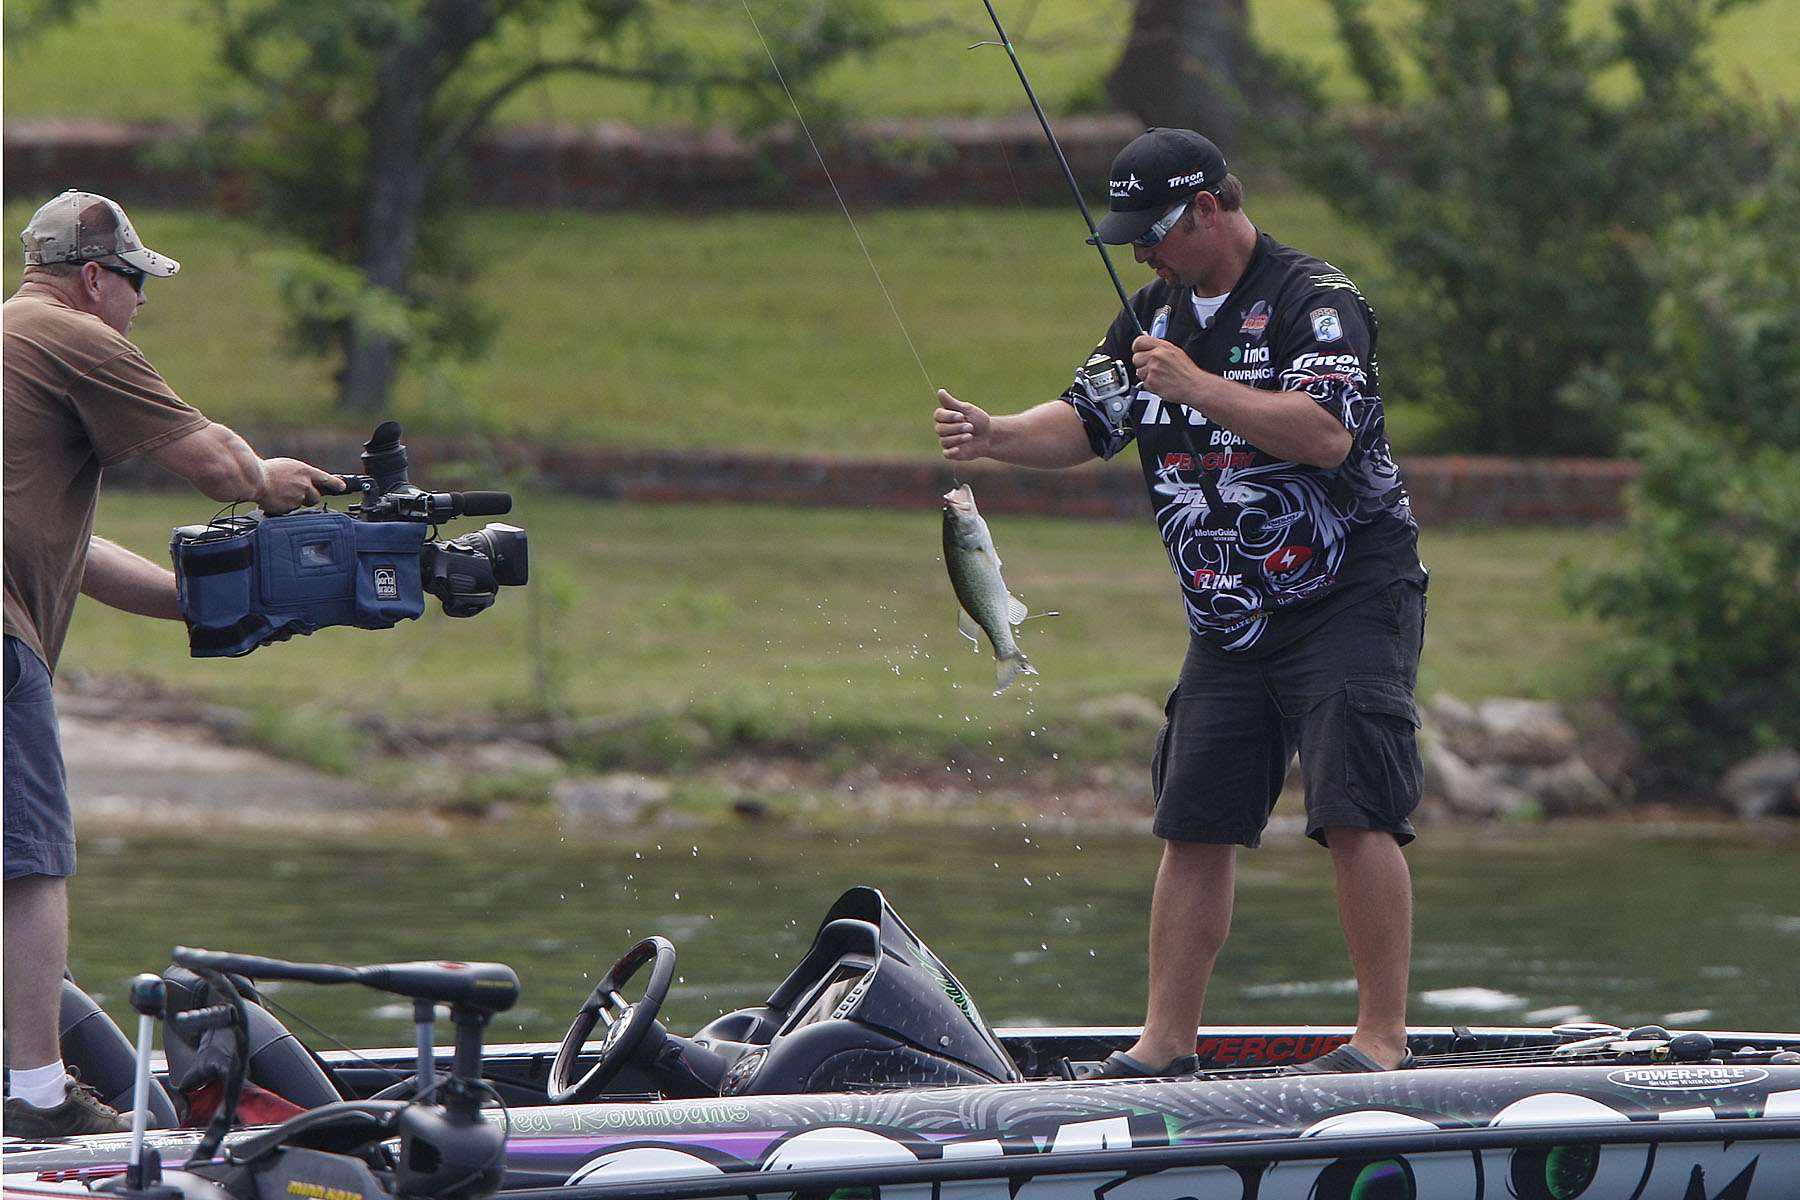 <p>
	<strong>FRED ROUMBANIS</strong></p>
<p>
	<strong>27th </strong><strong>in</strong><strong> </strong><strong>the Toyota Tundra Bassmaster Angler of the Year standings</strong></p>
<p>
	Roumbanis, who lives in Bixby, Okla., will fish his third Classic after missing the past two. He was 29th on the Red River, his last berth.</p>
